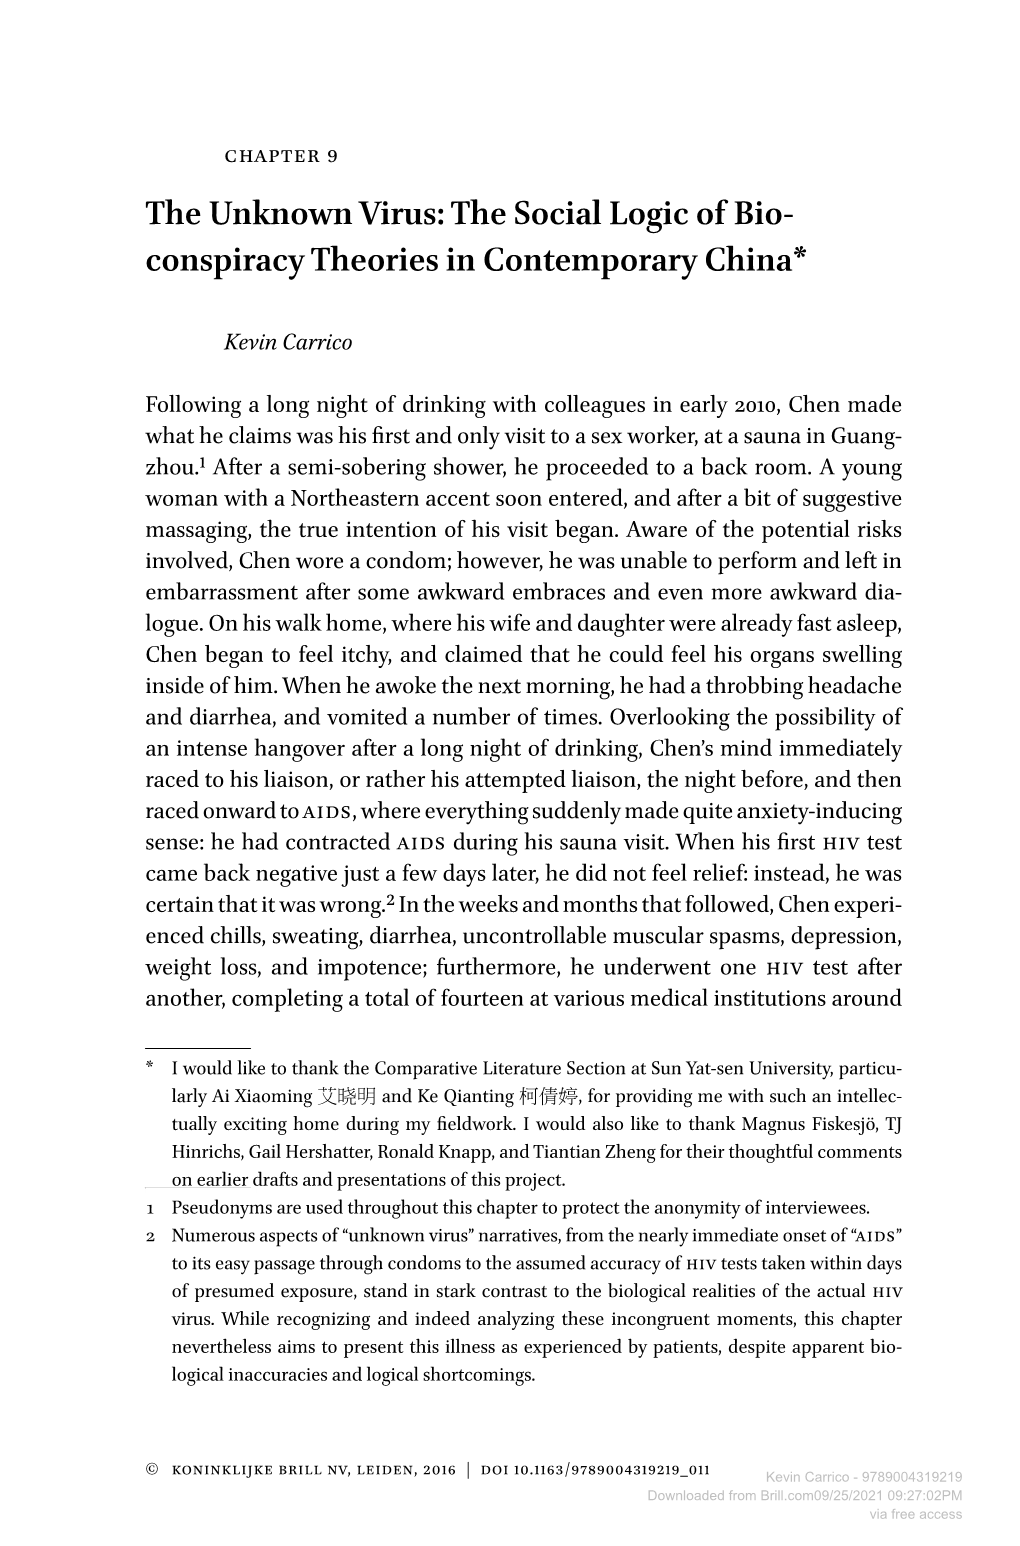 The Unknown Virus: the Social Logic of Bio- Conspiracy Theories in Contemporary China*